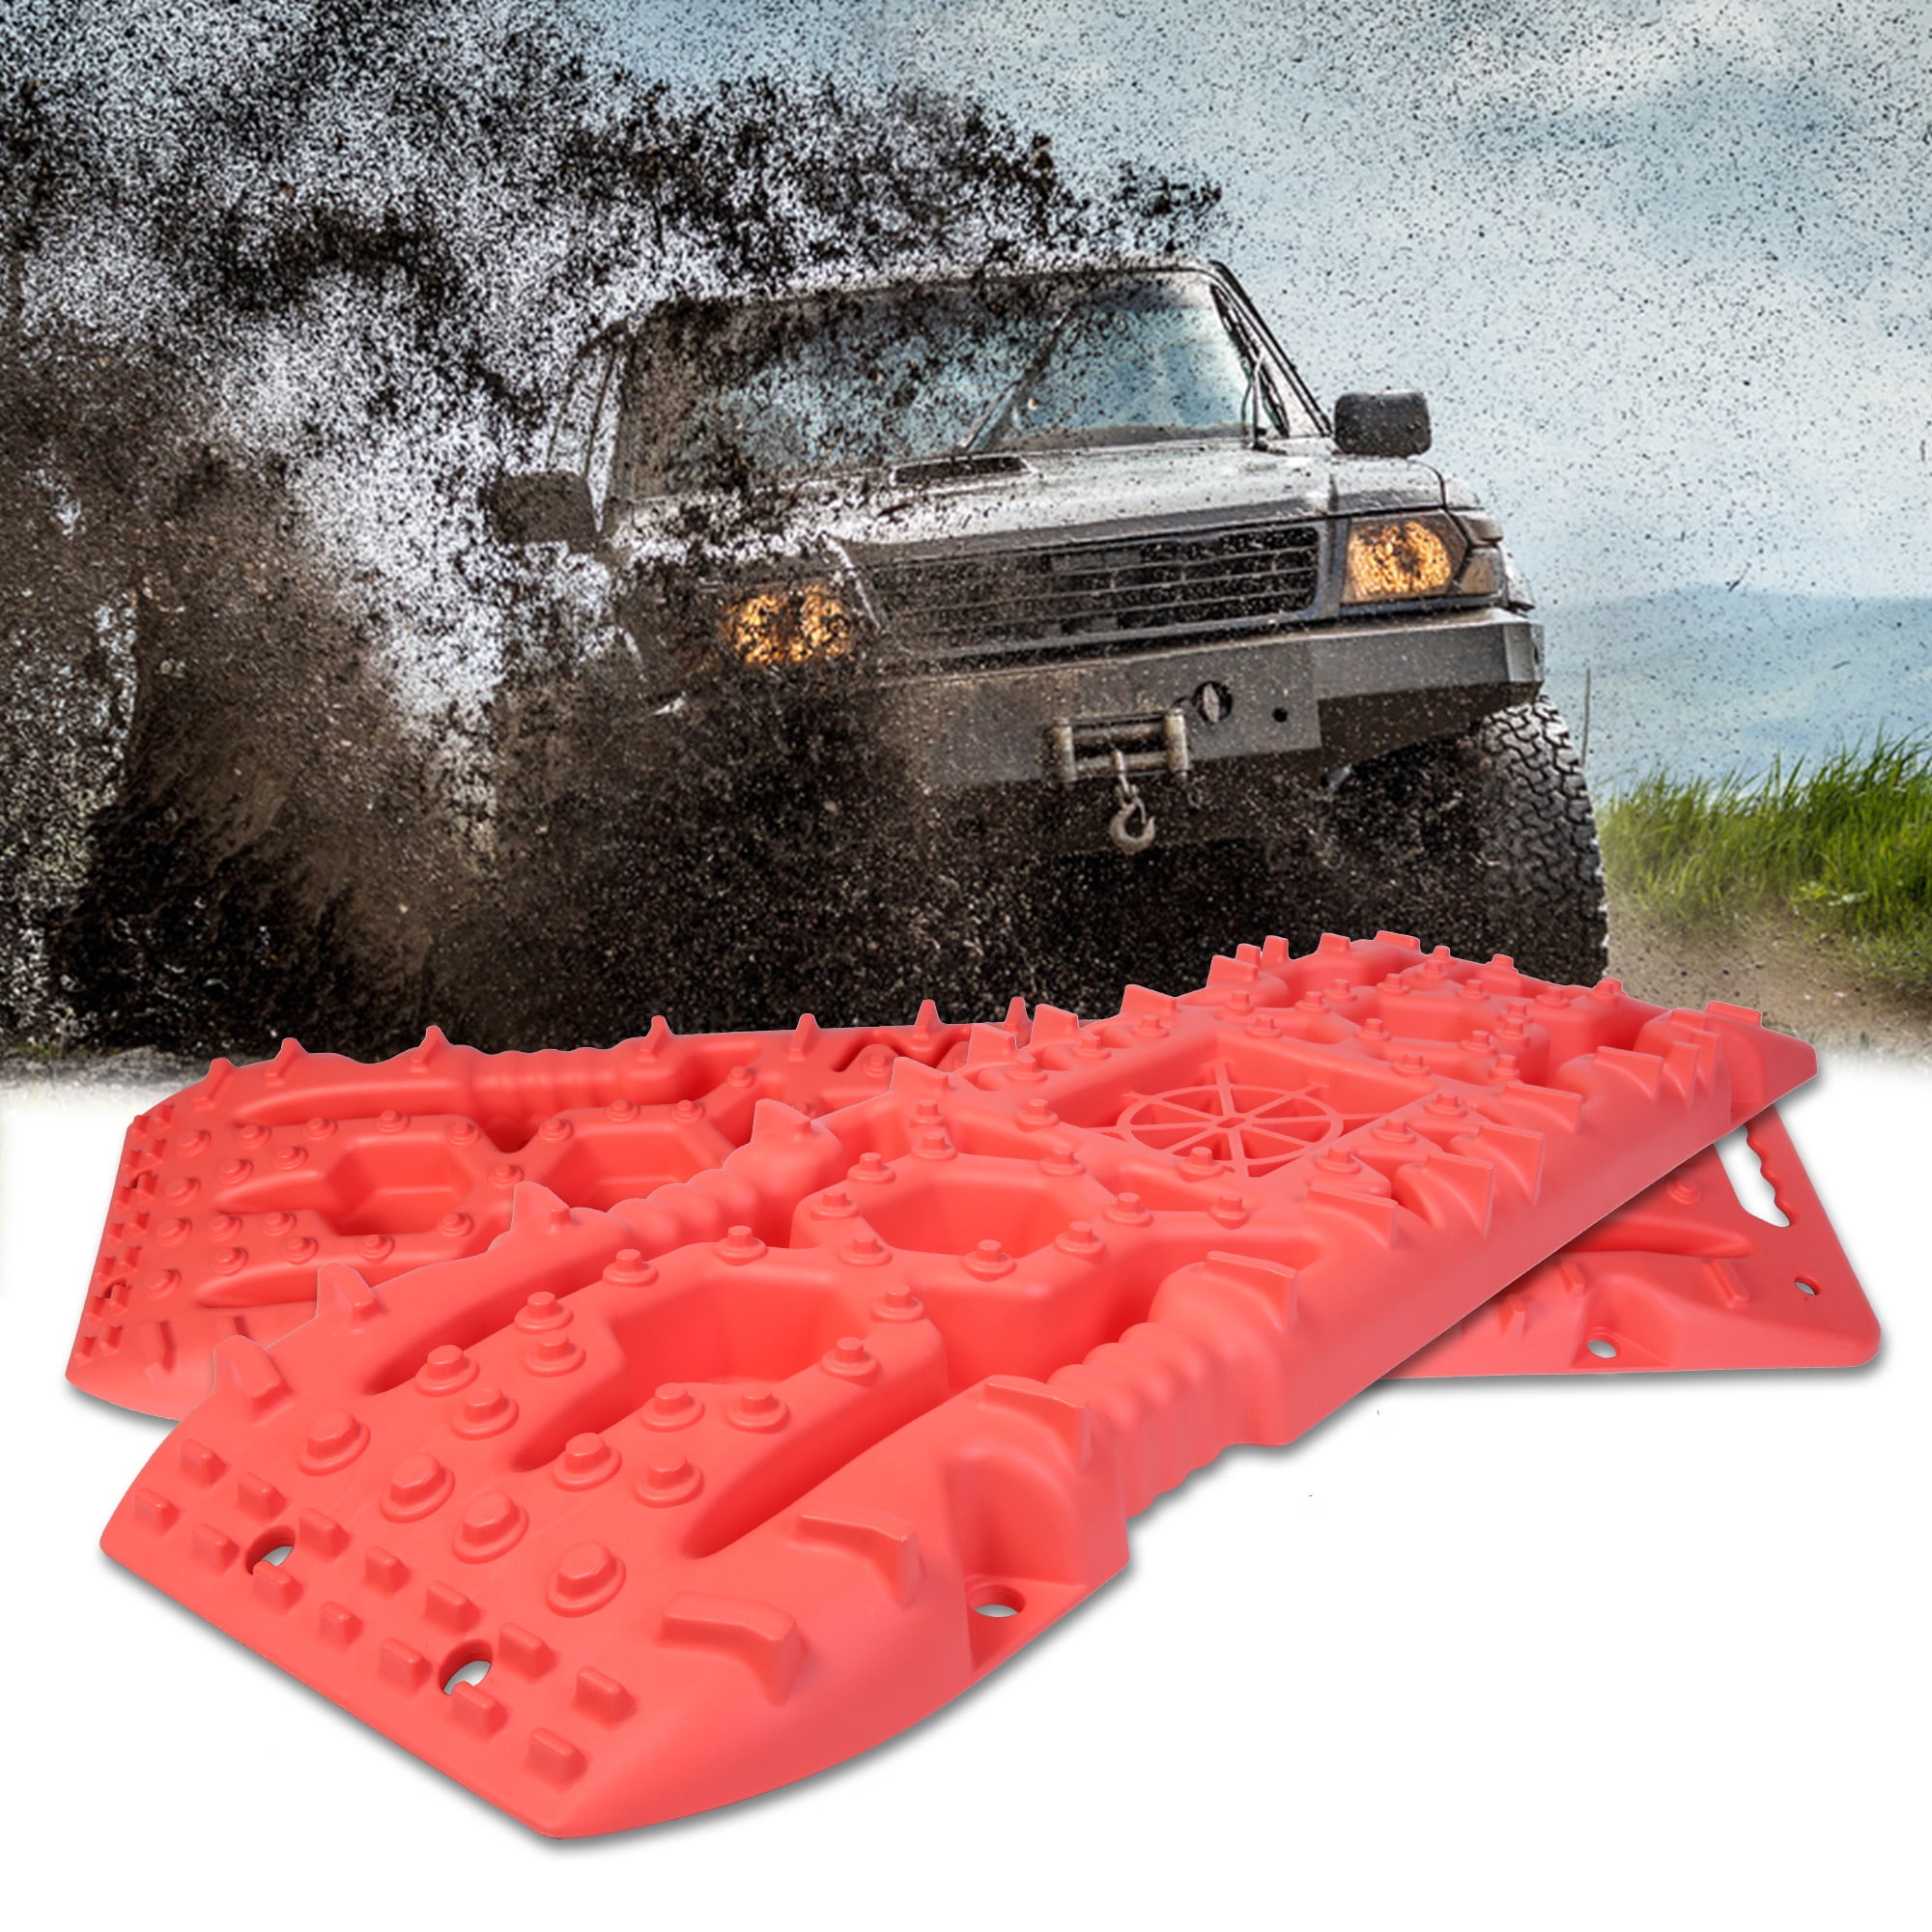 Small SUVs Sand,Emergency Tire Devices for Cars 2 Pack Ice Portable Recovery Track Boards for Off Road 4X4 Snow BUNKER INDUST Tire Traction Mats Foldable Trucks 